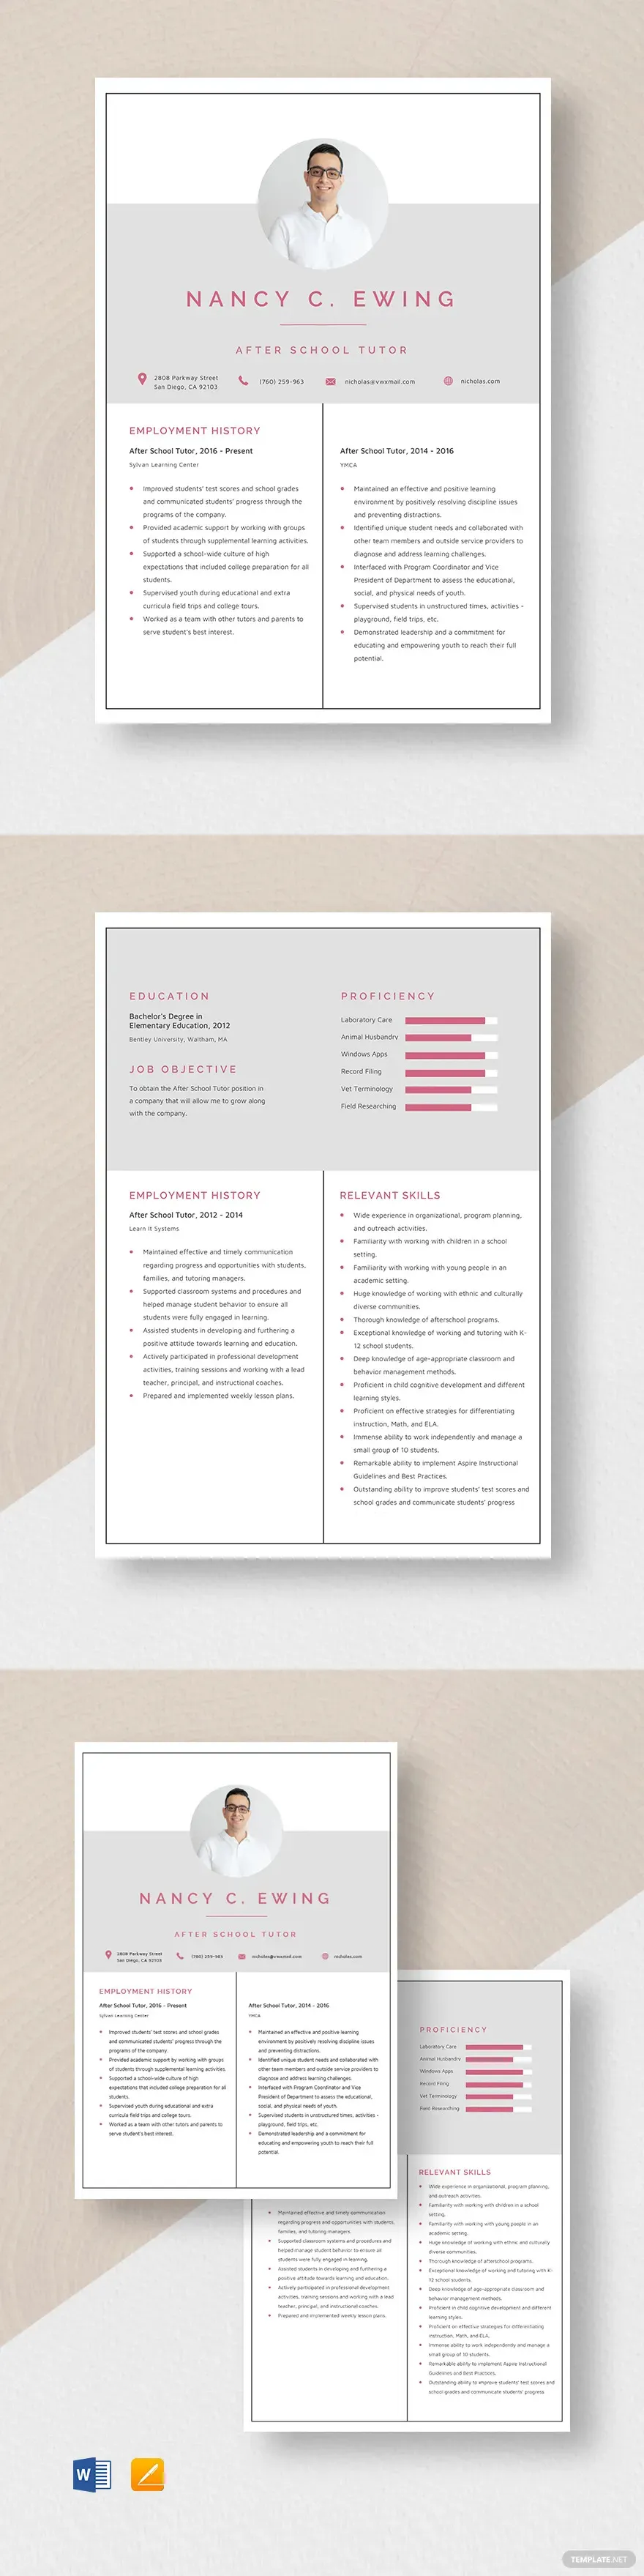 resume ideas examples for school